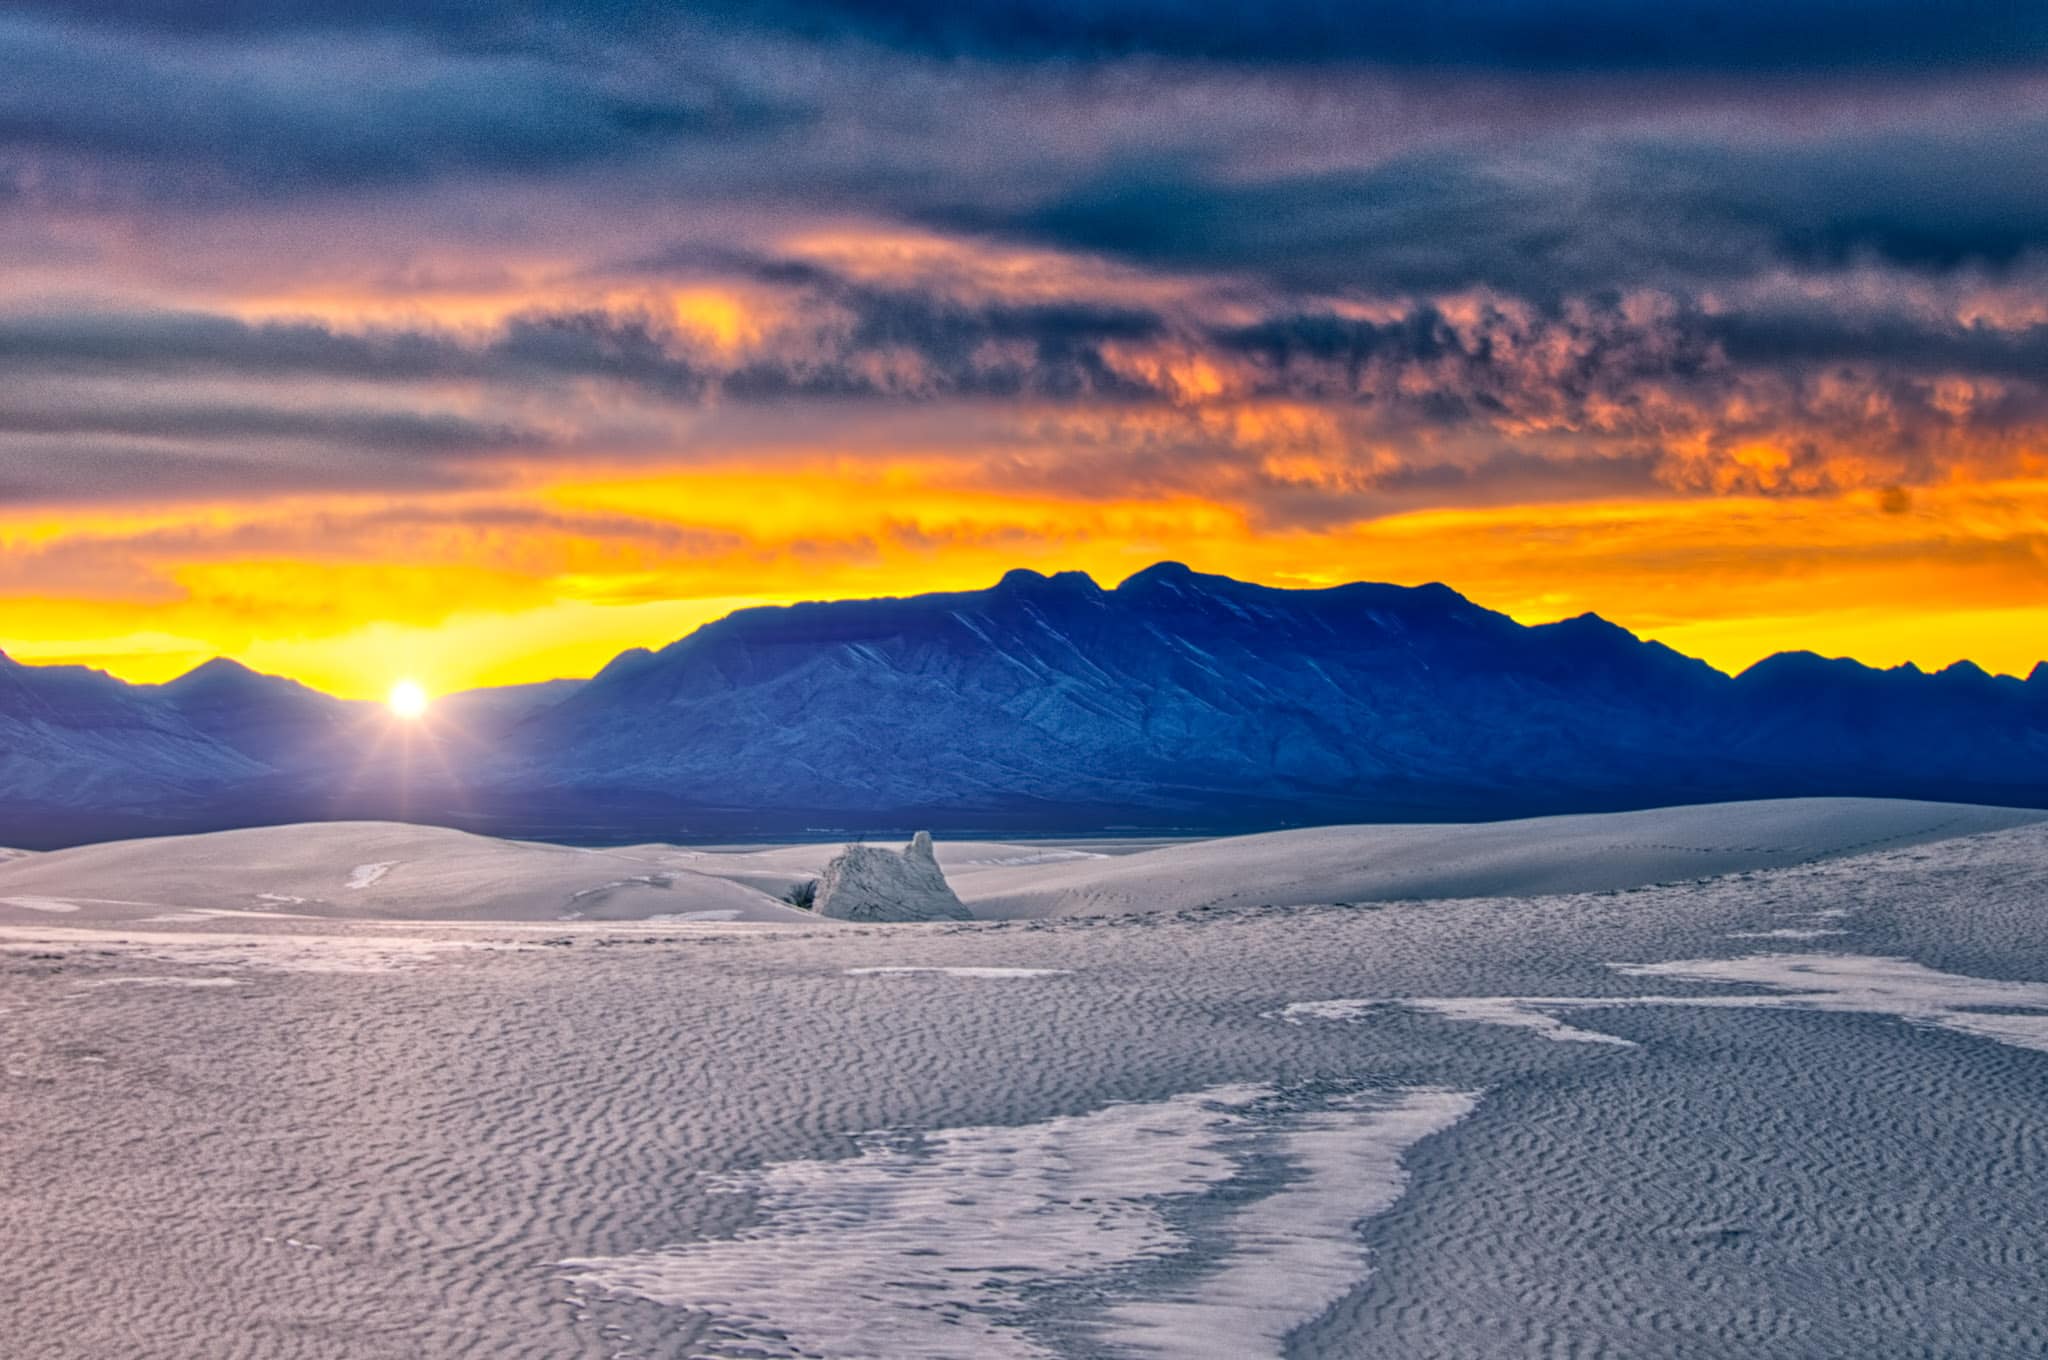 The setting sun accentuates the ripples in the gypsum sand of White Sands National Monument in New Mexico.